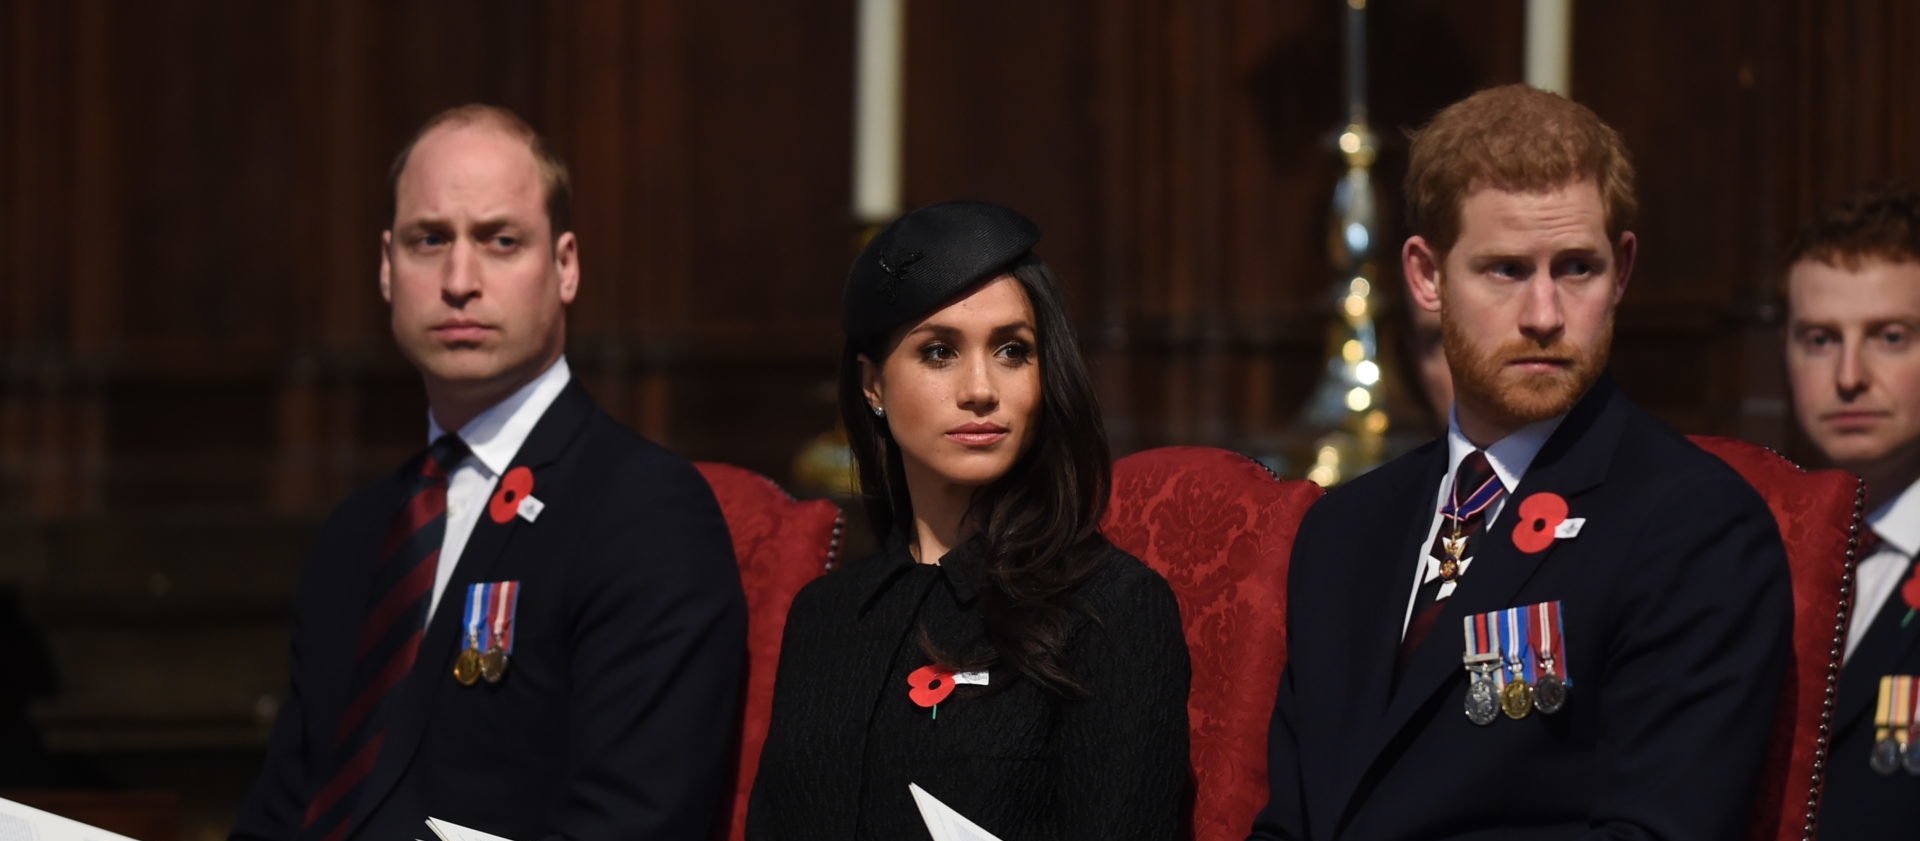 Prince William's brutal nine words about Meghan Markle 'hurt' Harry - cover